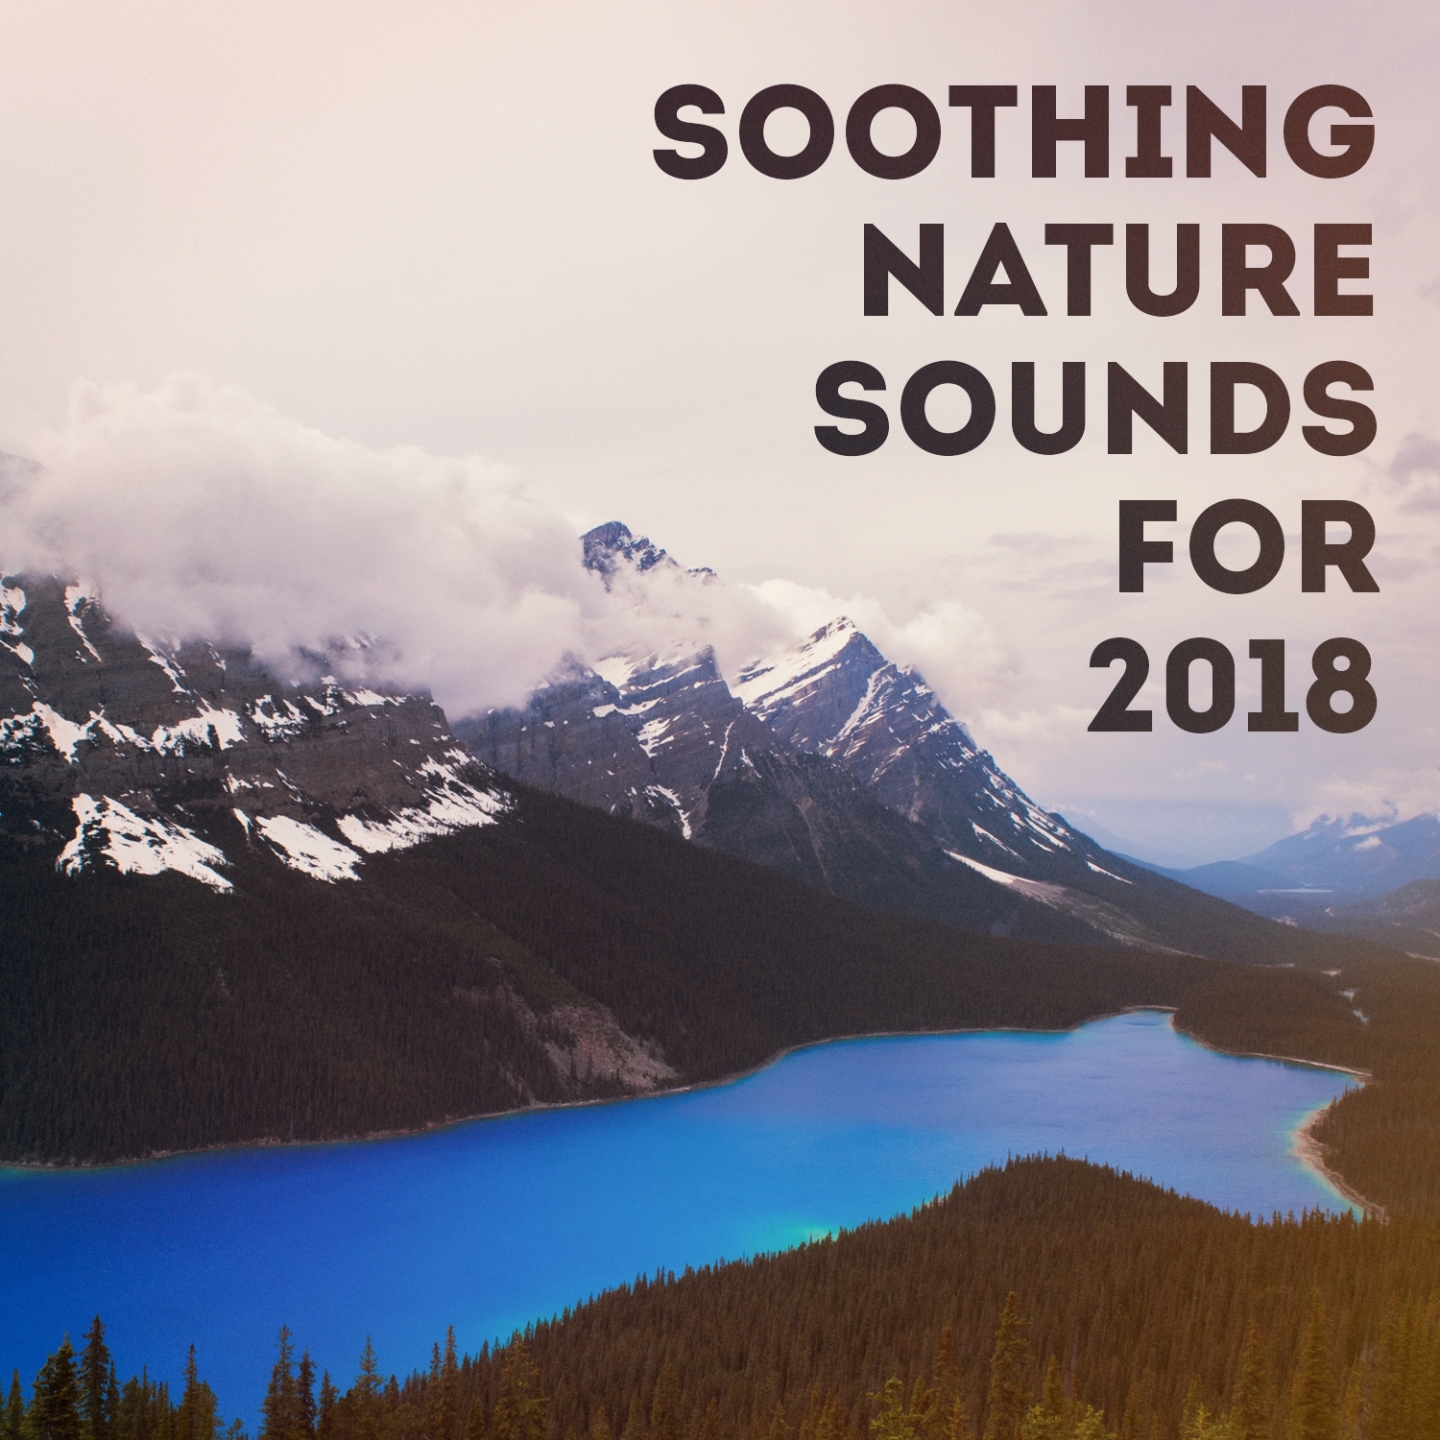 Soothing nature sounds for 2018